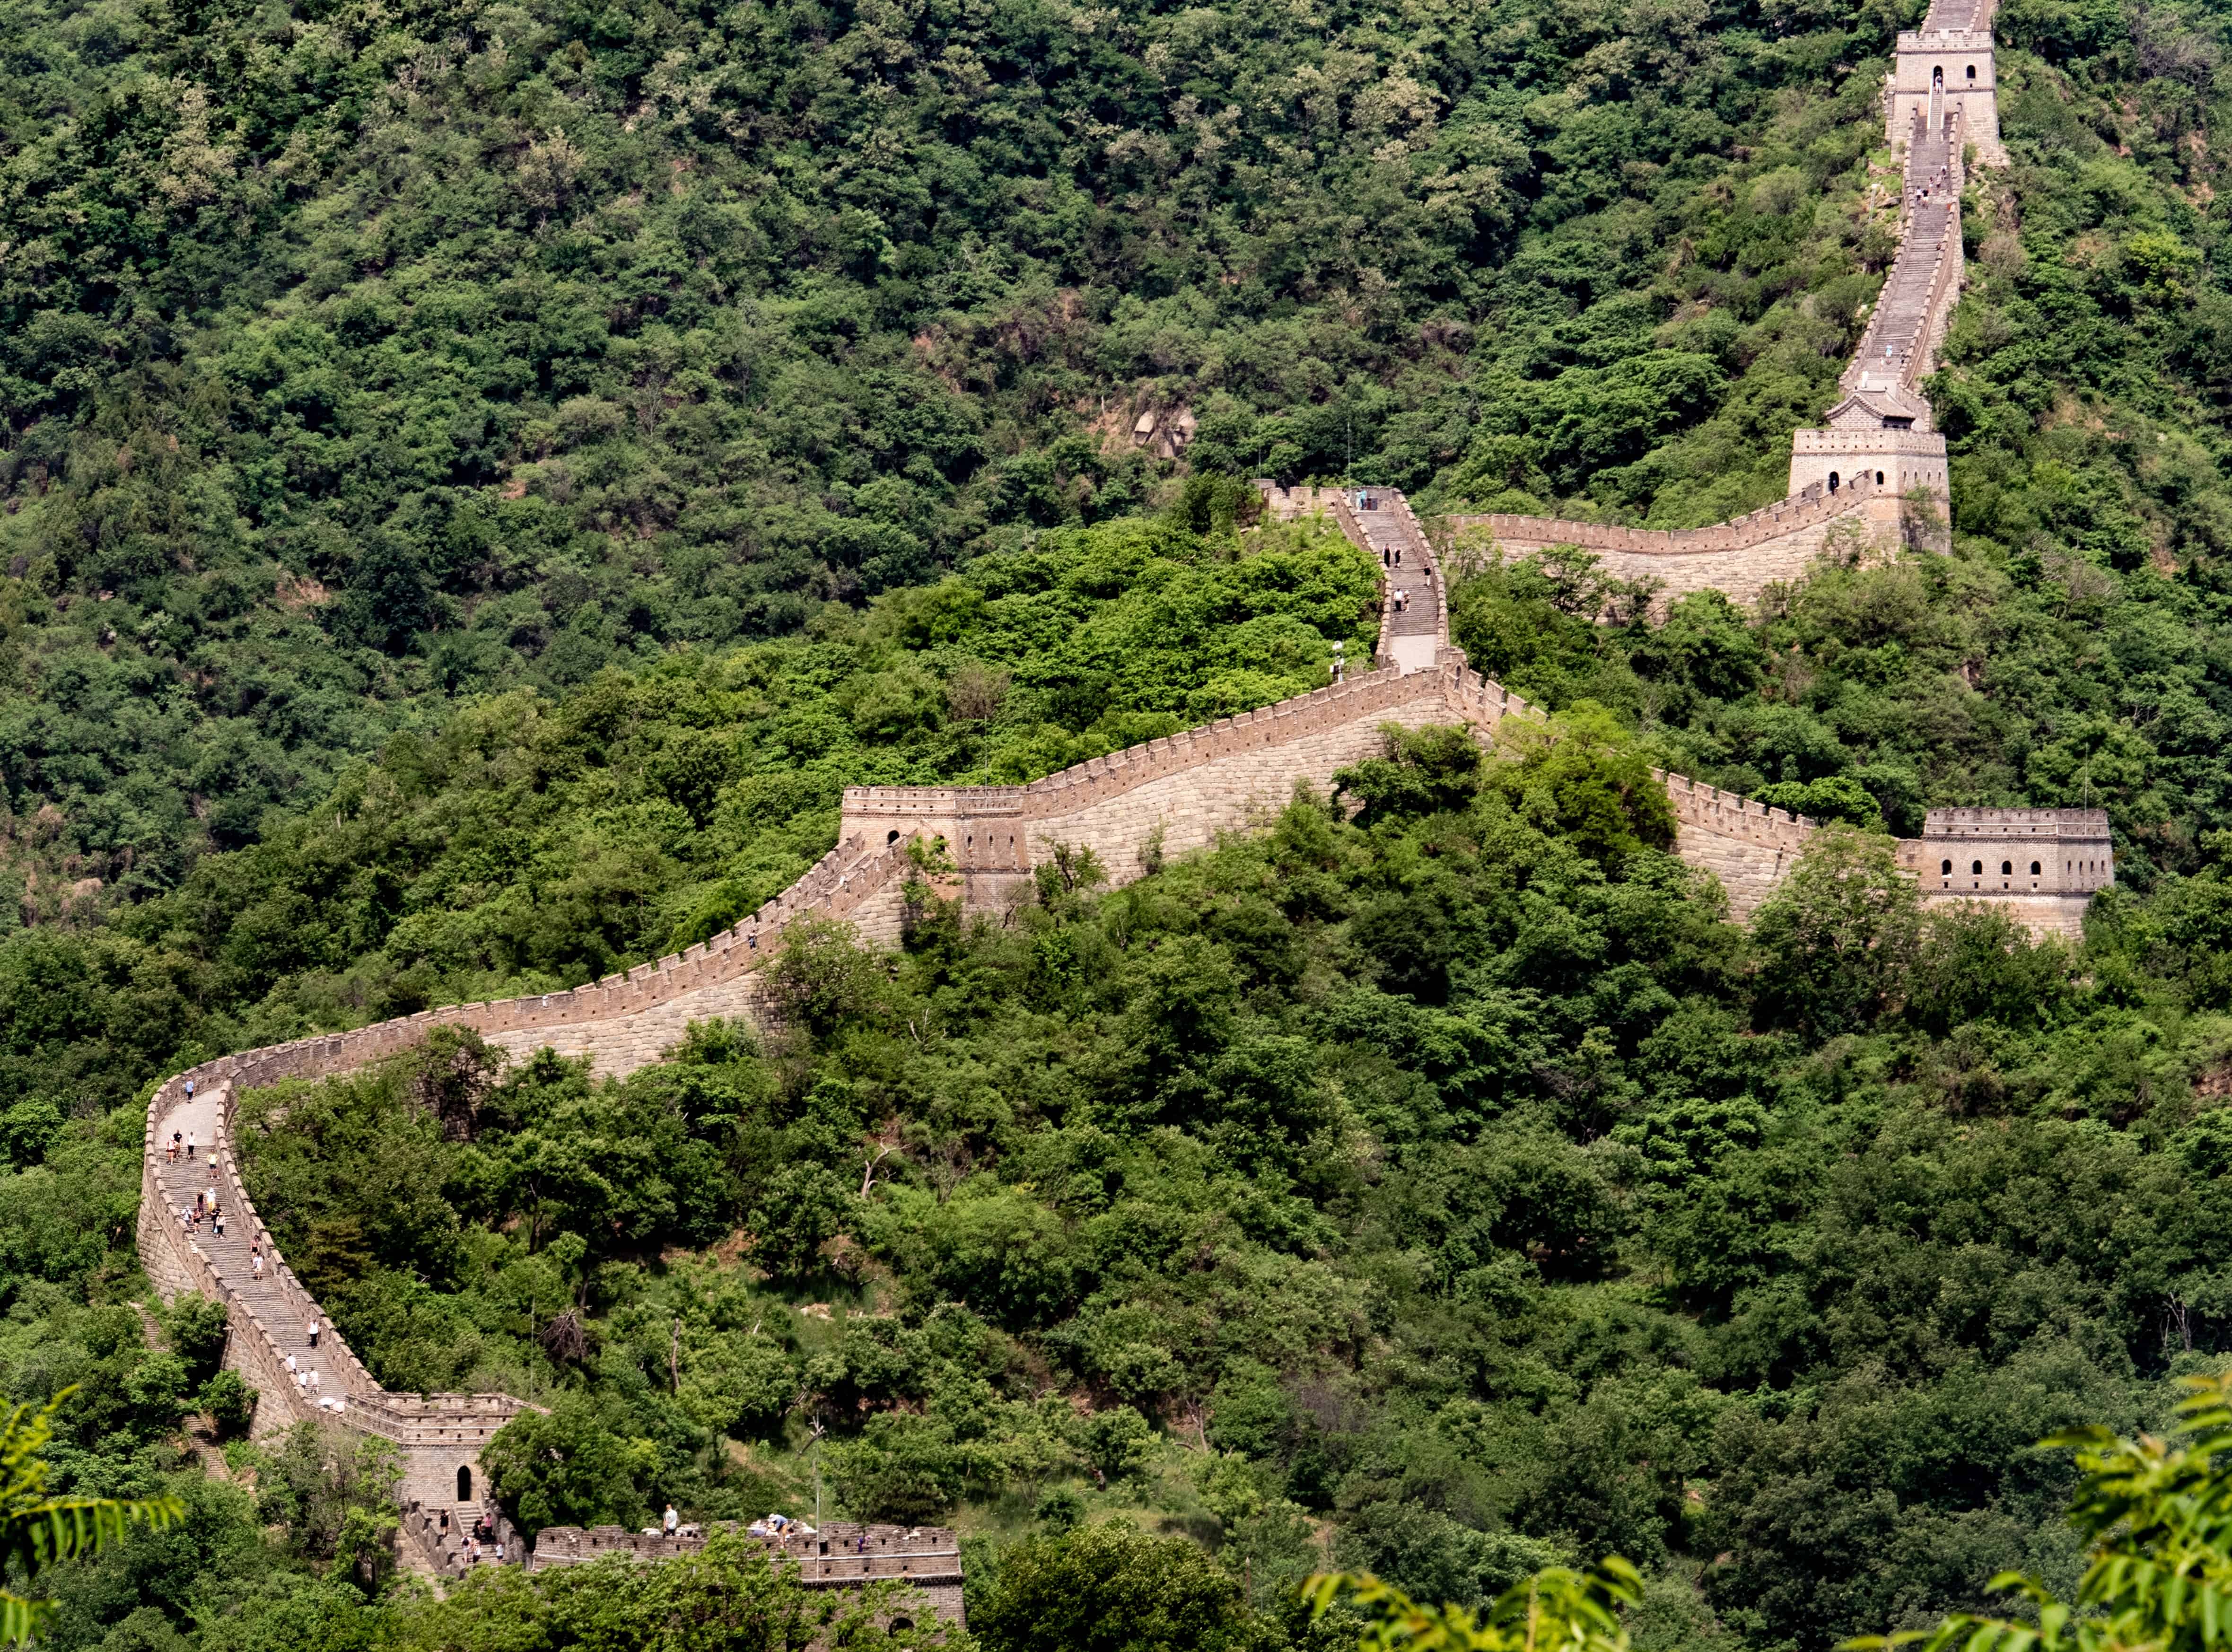 50 Great Wall Of China Facts About This Grand Landmark | Facts.net